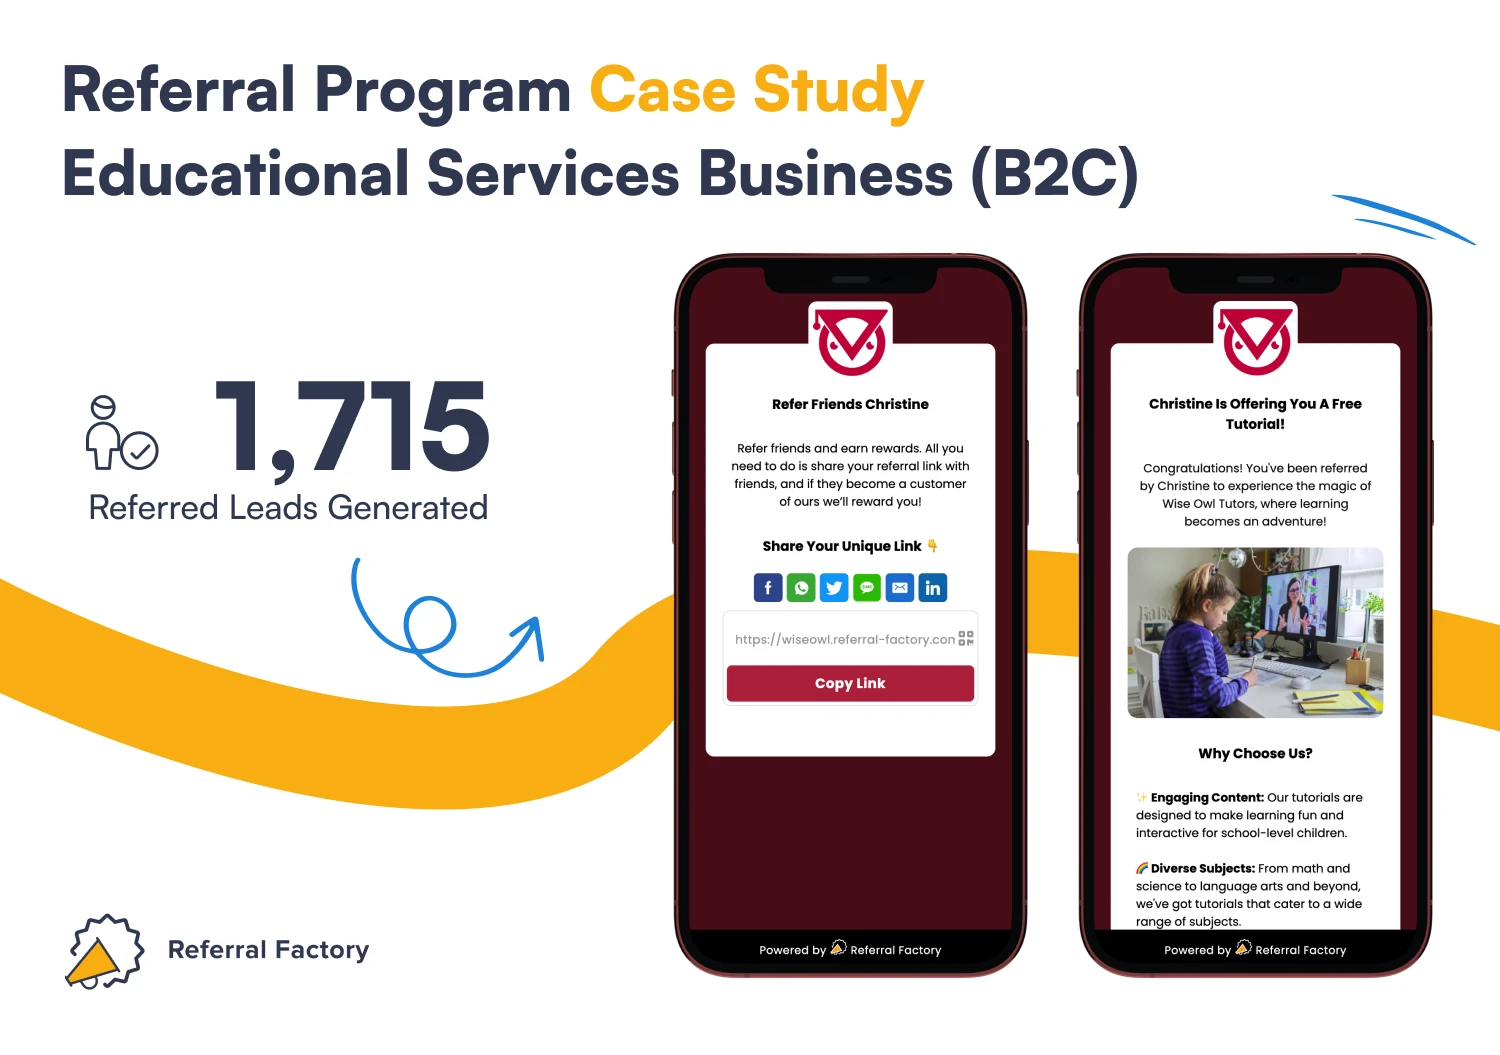 case study referred leads generated educational services business